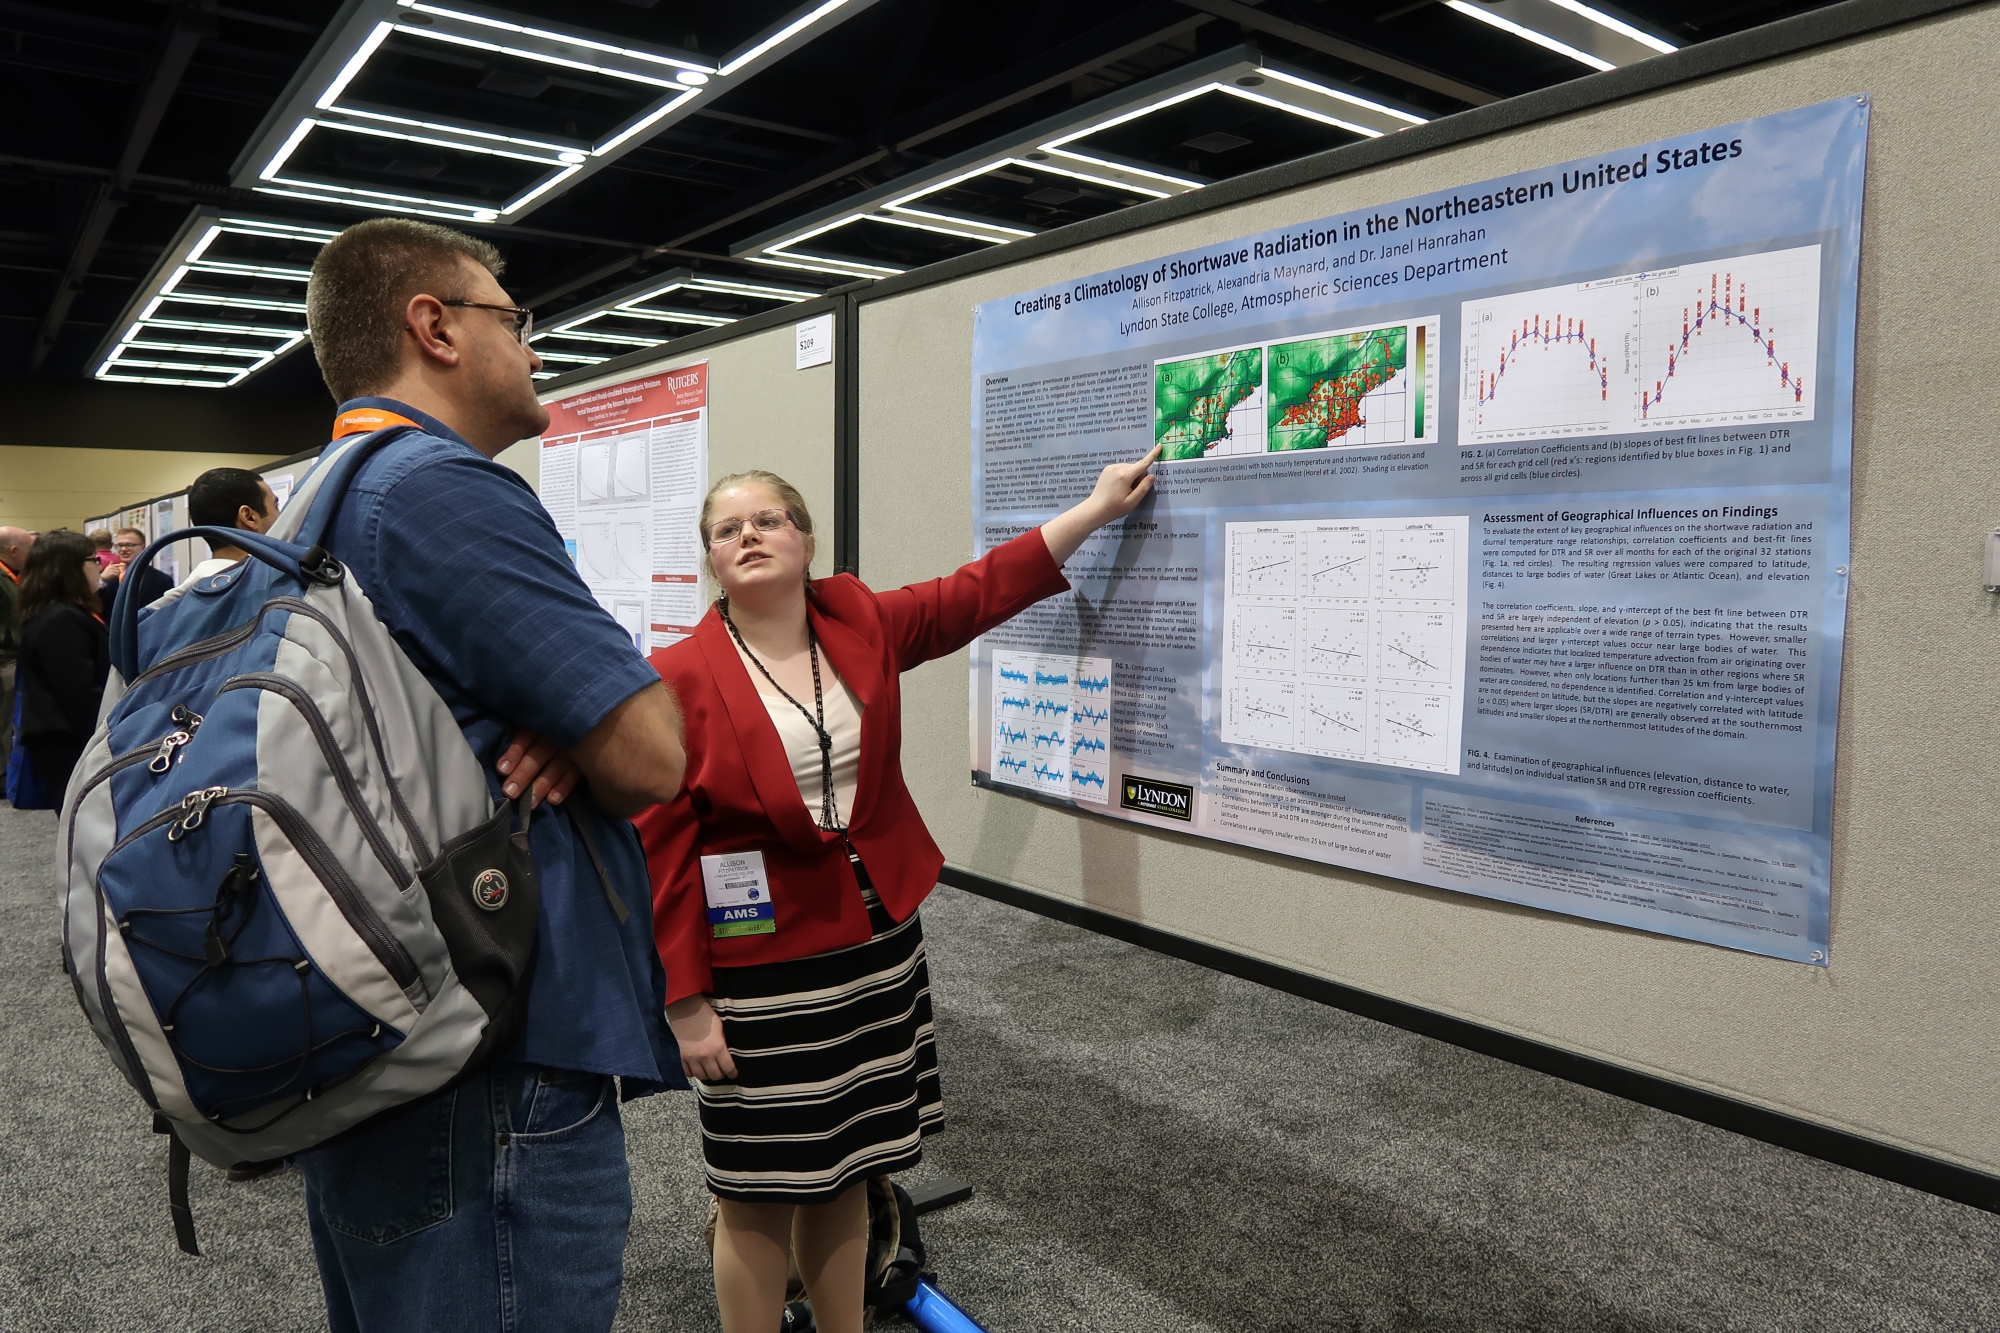 Students and Faculty Present at National AMS Annual Meeting